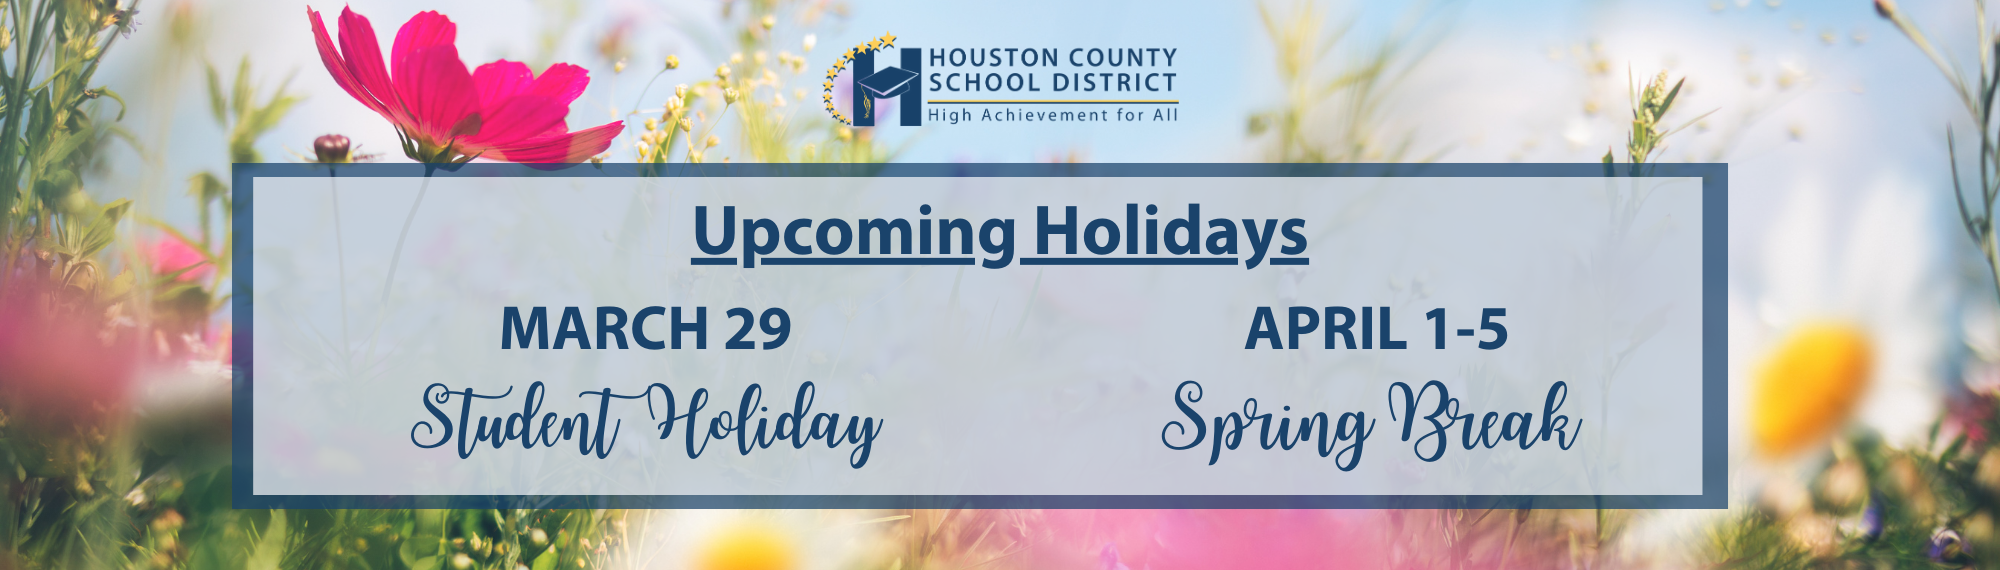 Upcoming Holidays: March 29 Student Holiday, April 1-5 Spring Break